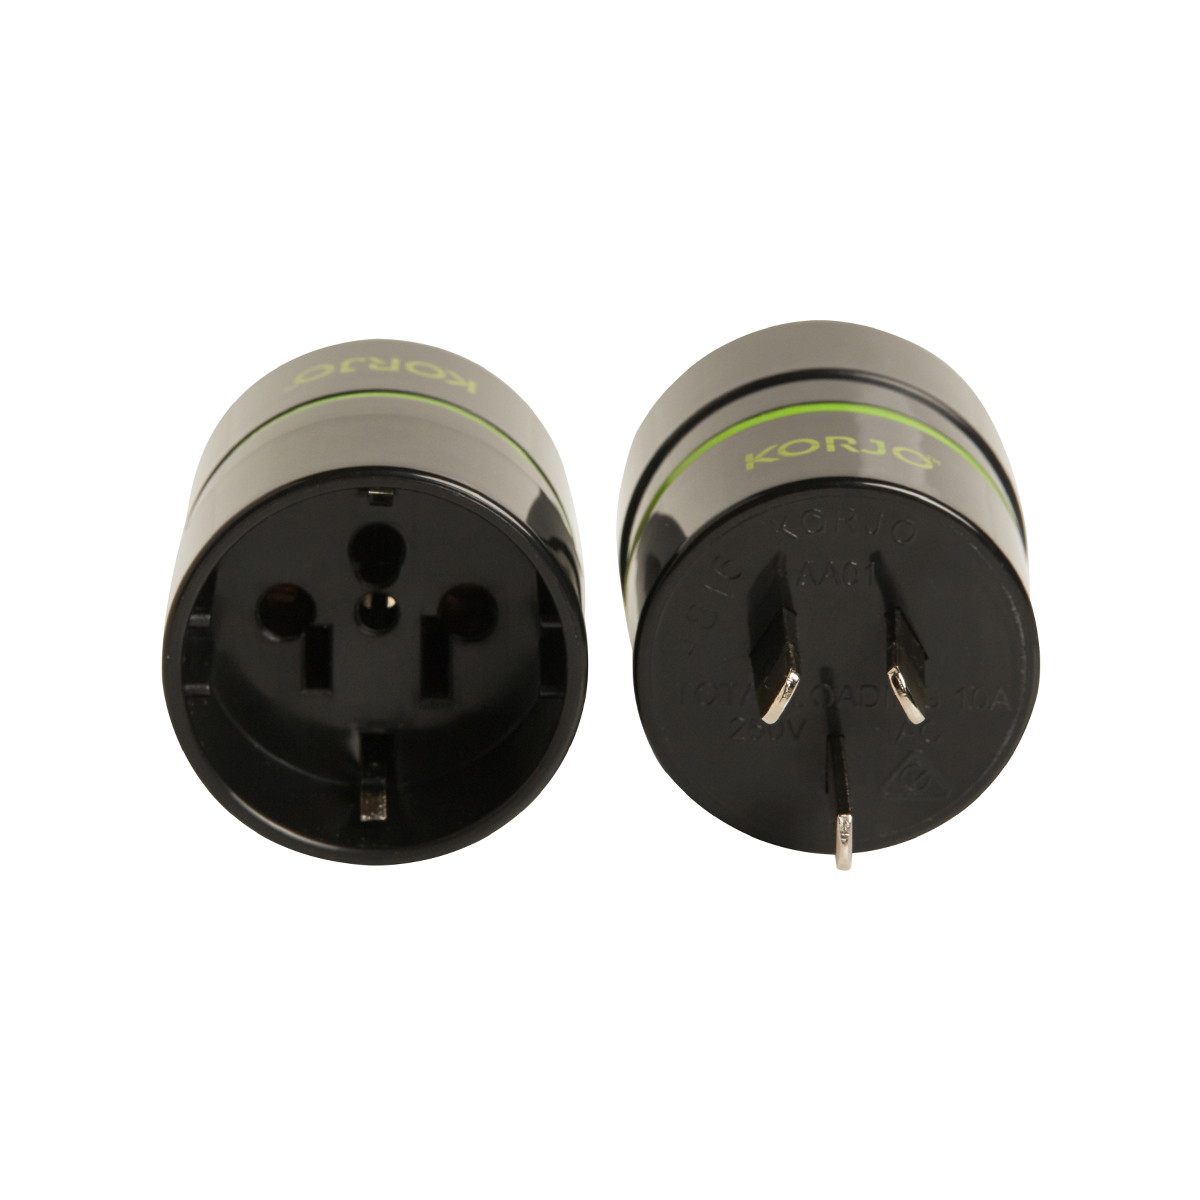 Adaptor for FROM EU, US |